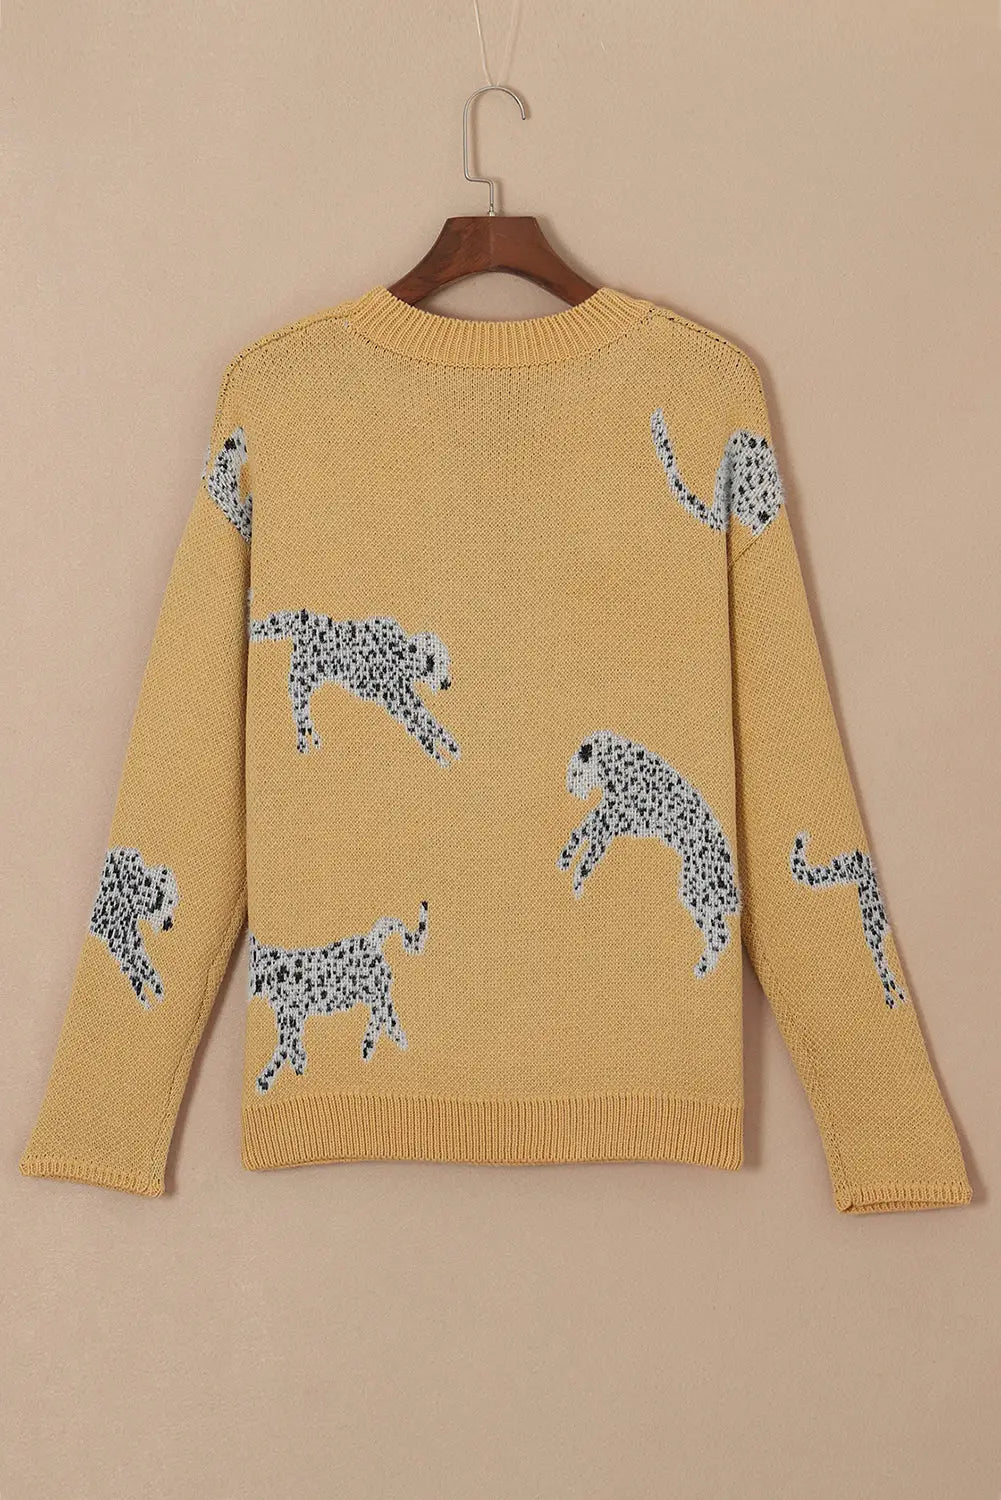 Camel fuzzy cheetah accent round neck sweater - sweaters & cardigans